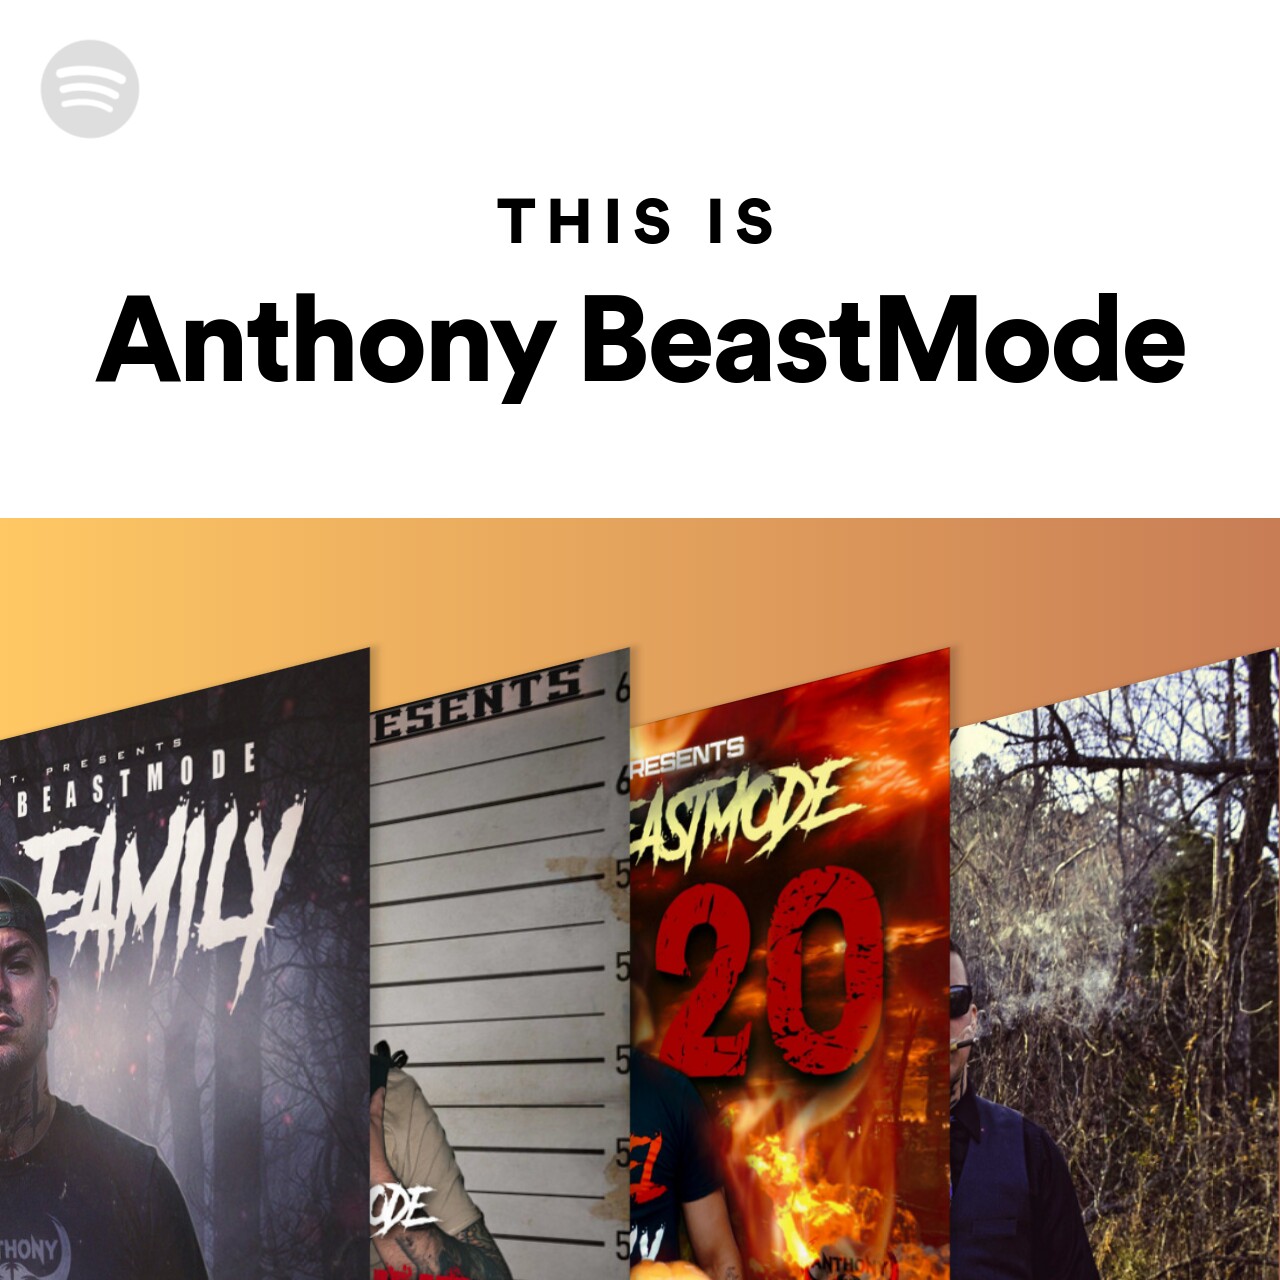 This Is Anthony BeastMode